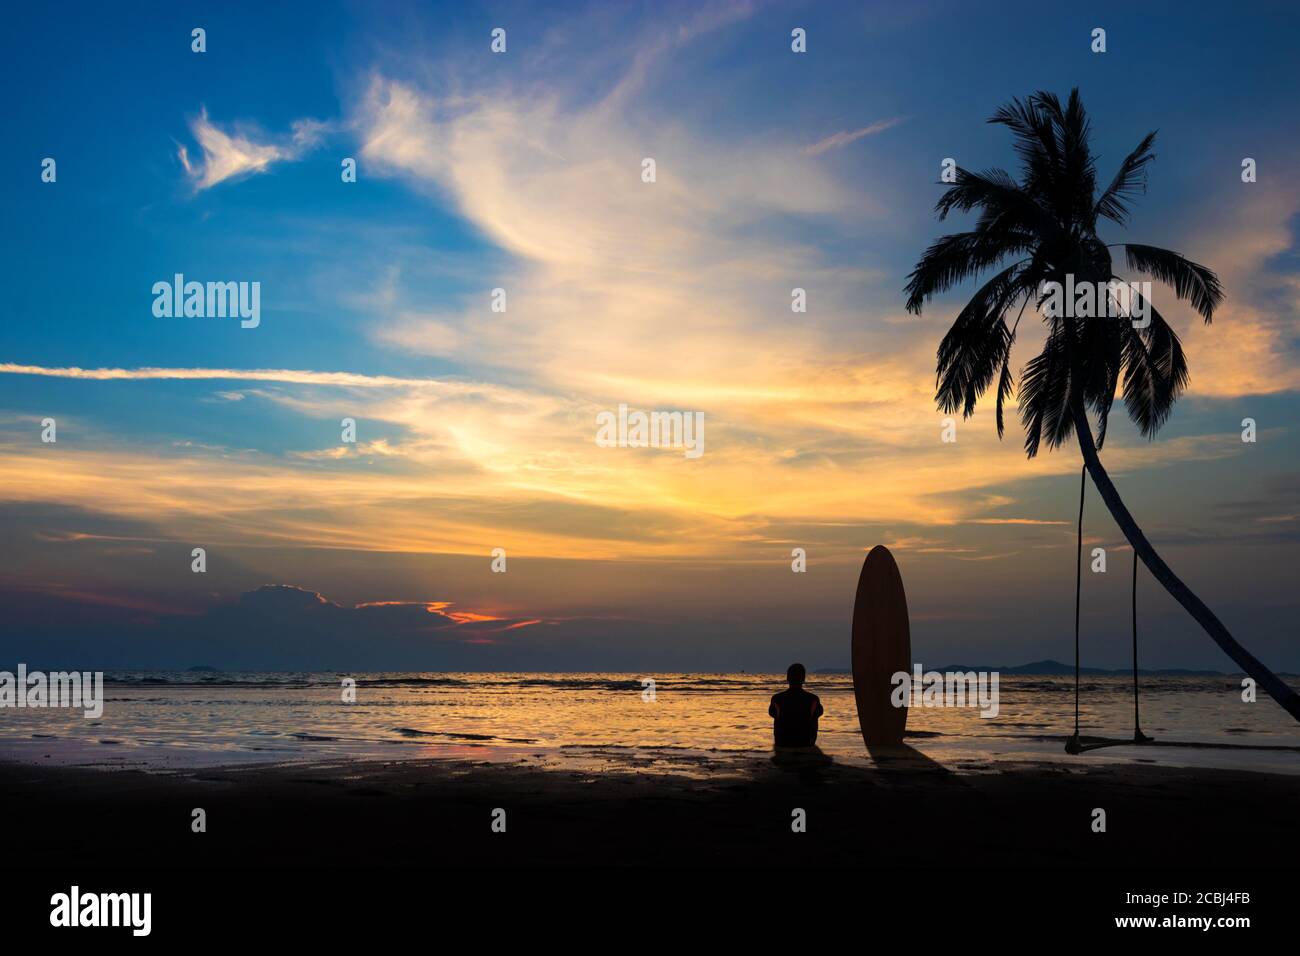 Silhouette of surf man sit with a surfboard on the beach. Surfing scene at sunset beach with colorful sky. Outdoor water sport adventure lifestyle. Stock Photo